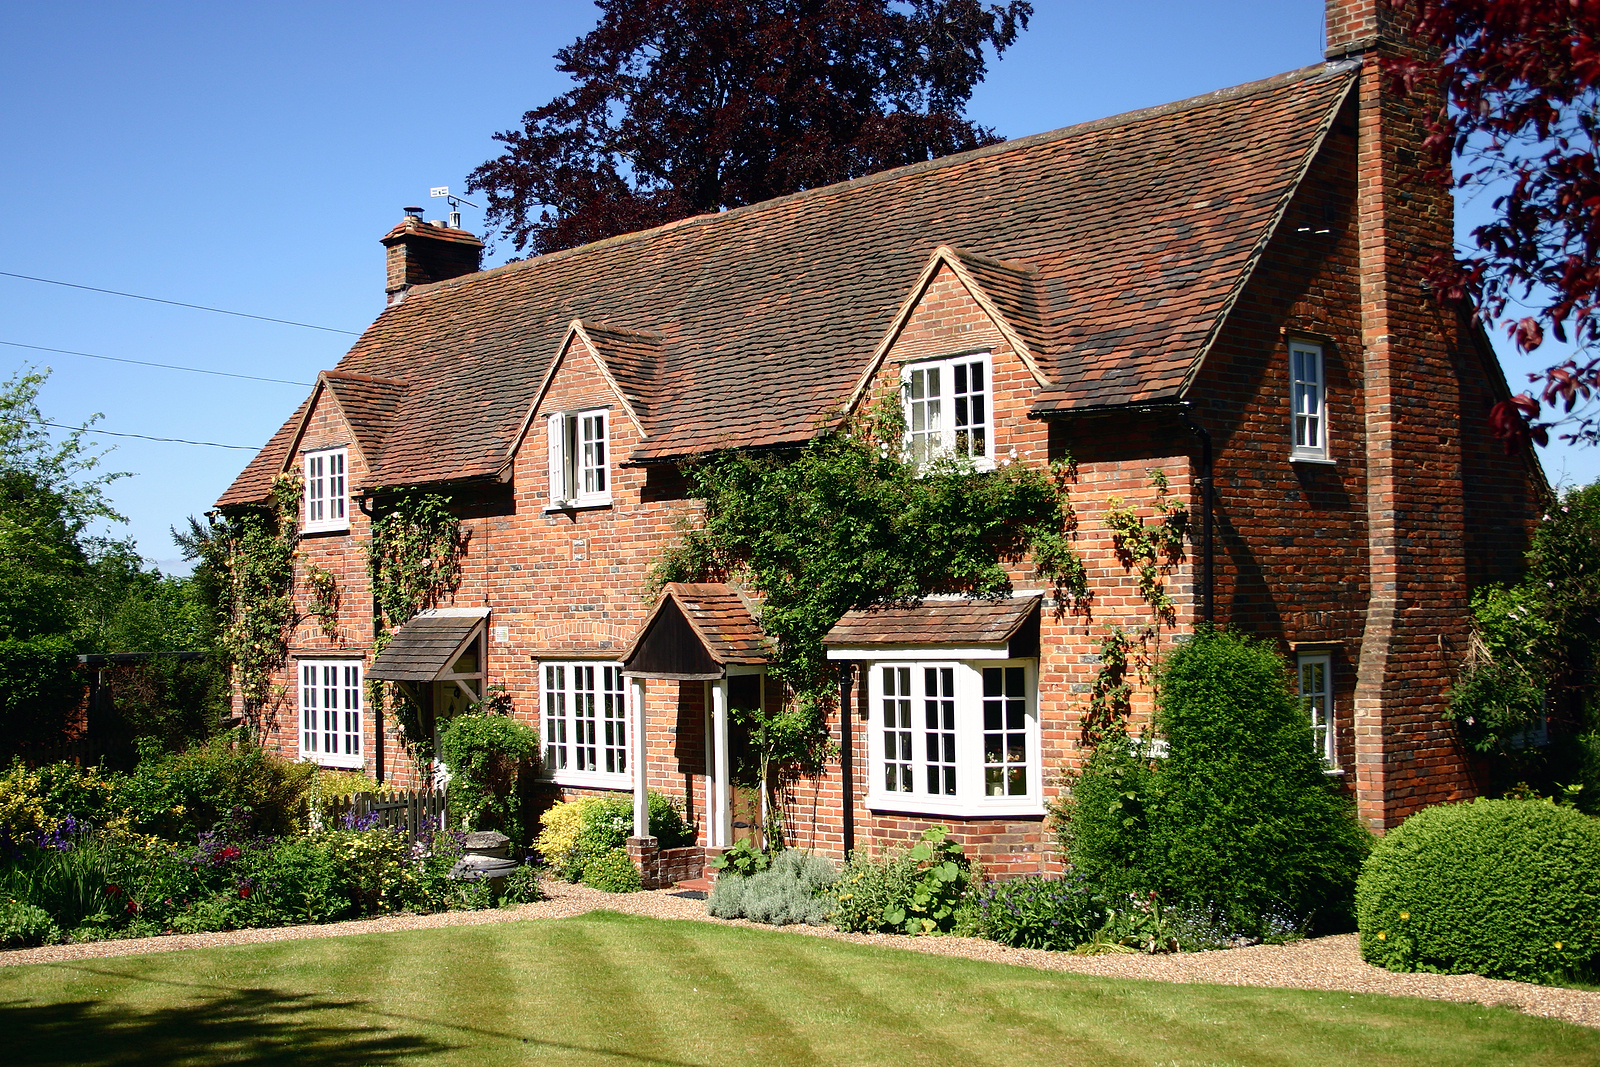 A traditional English country cottage brick built with manicured lawns